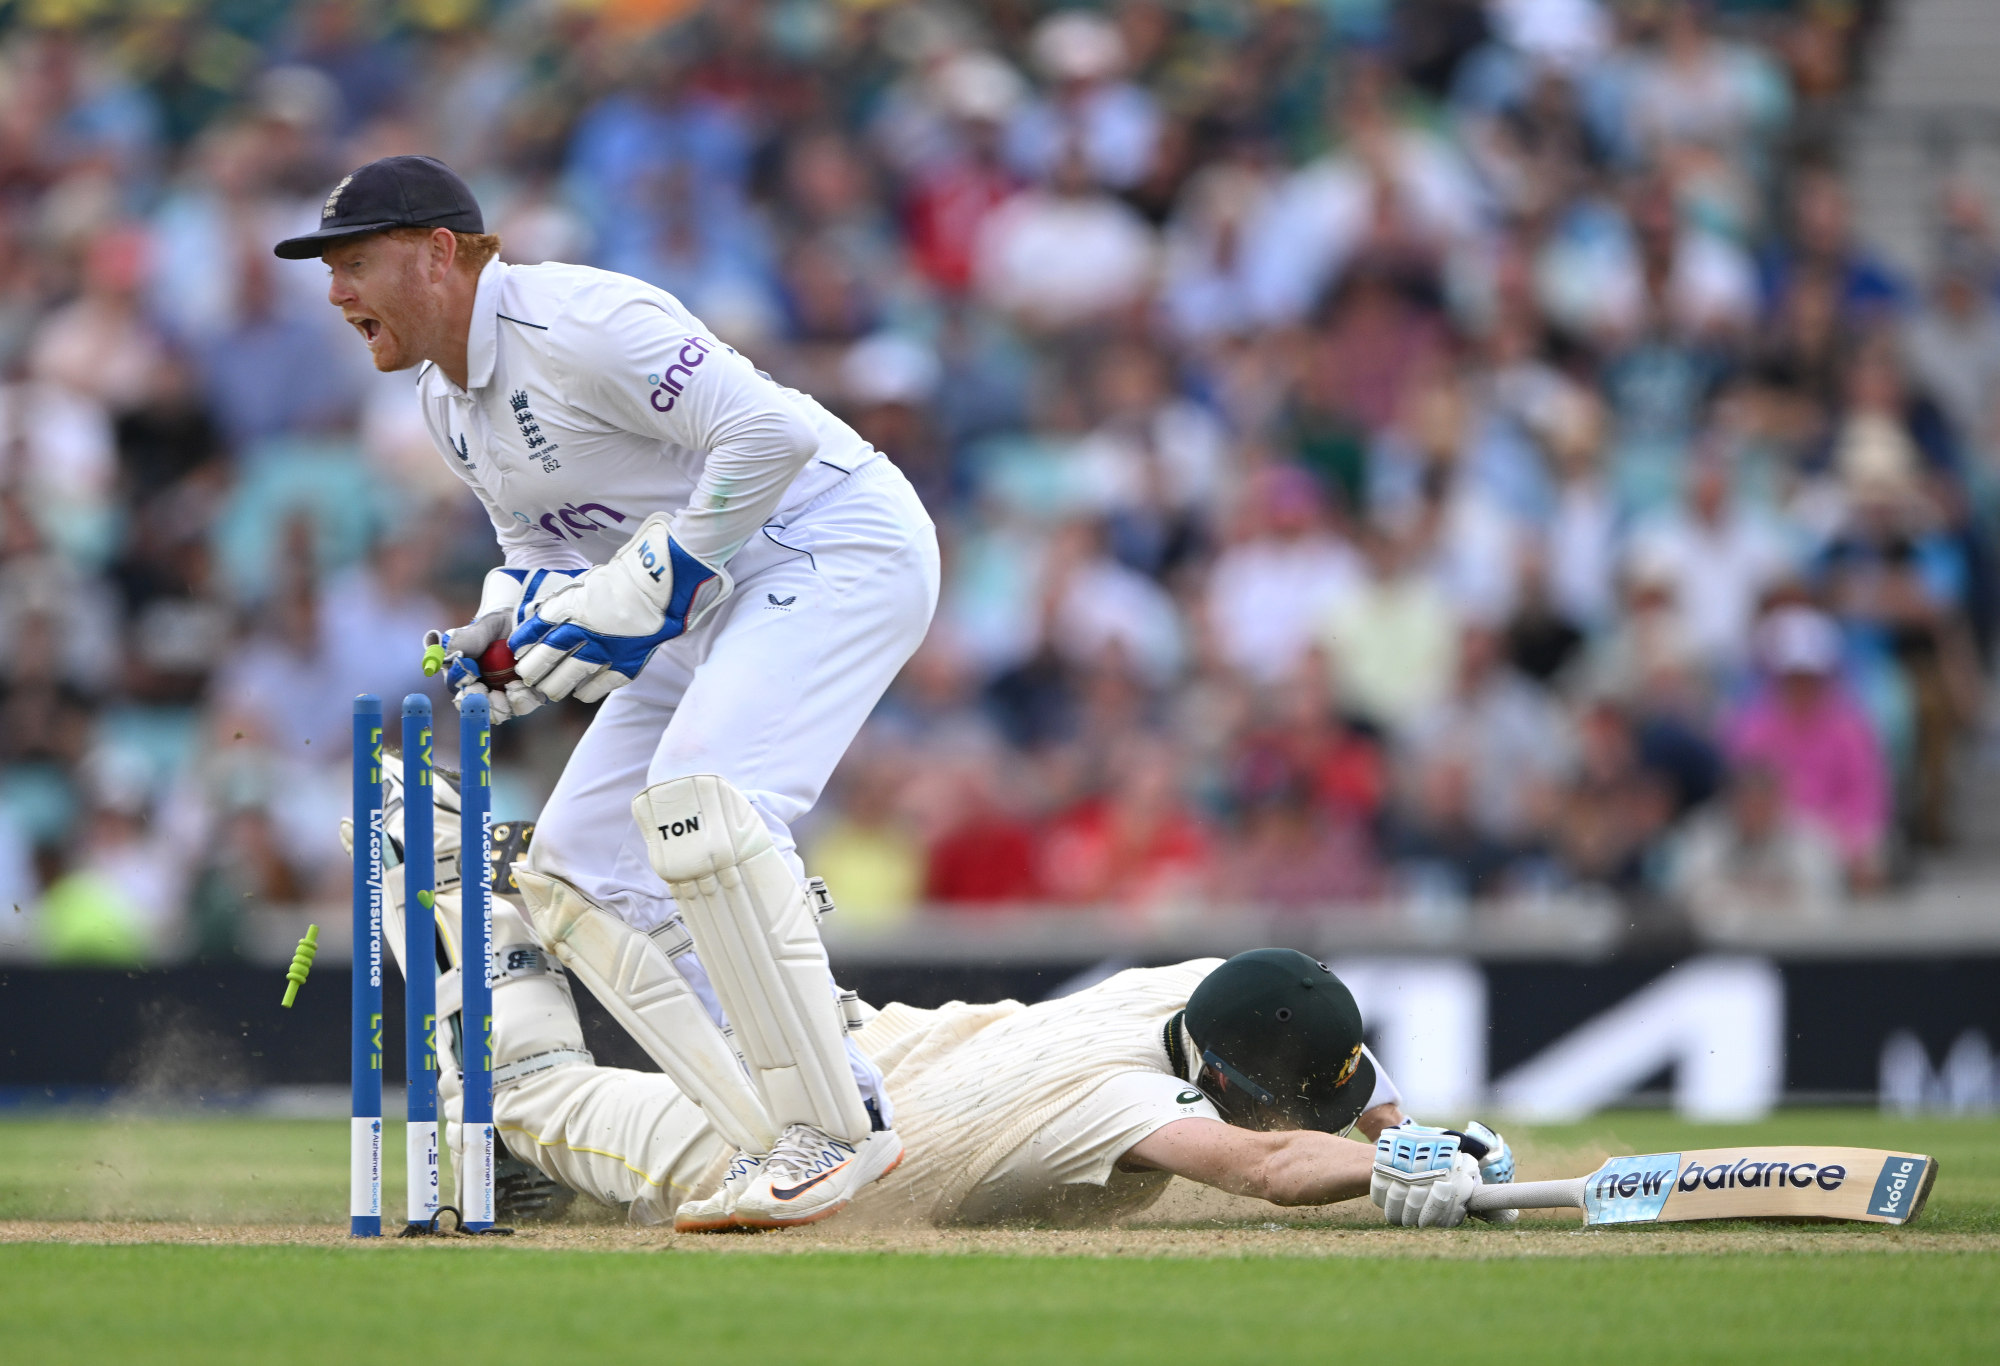 Jonny Bairstow attempts to run out Steve Smith in a controversial moment at The Oval.